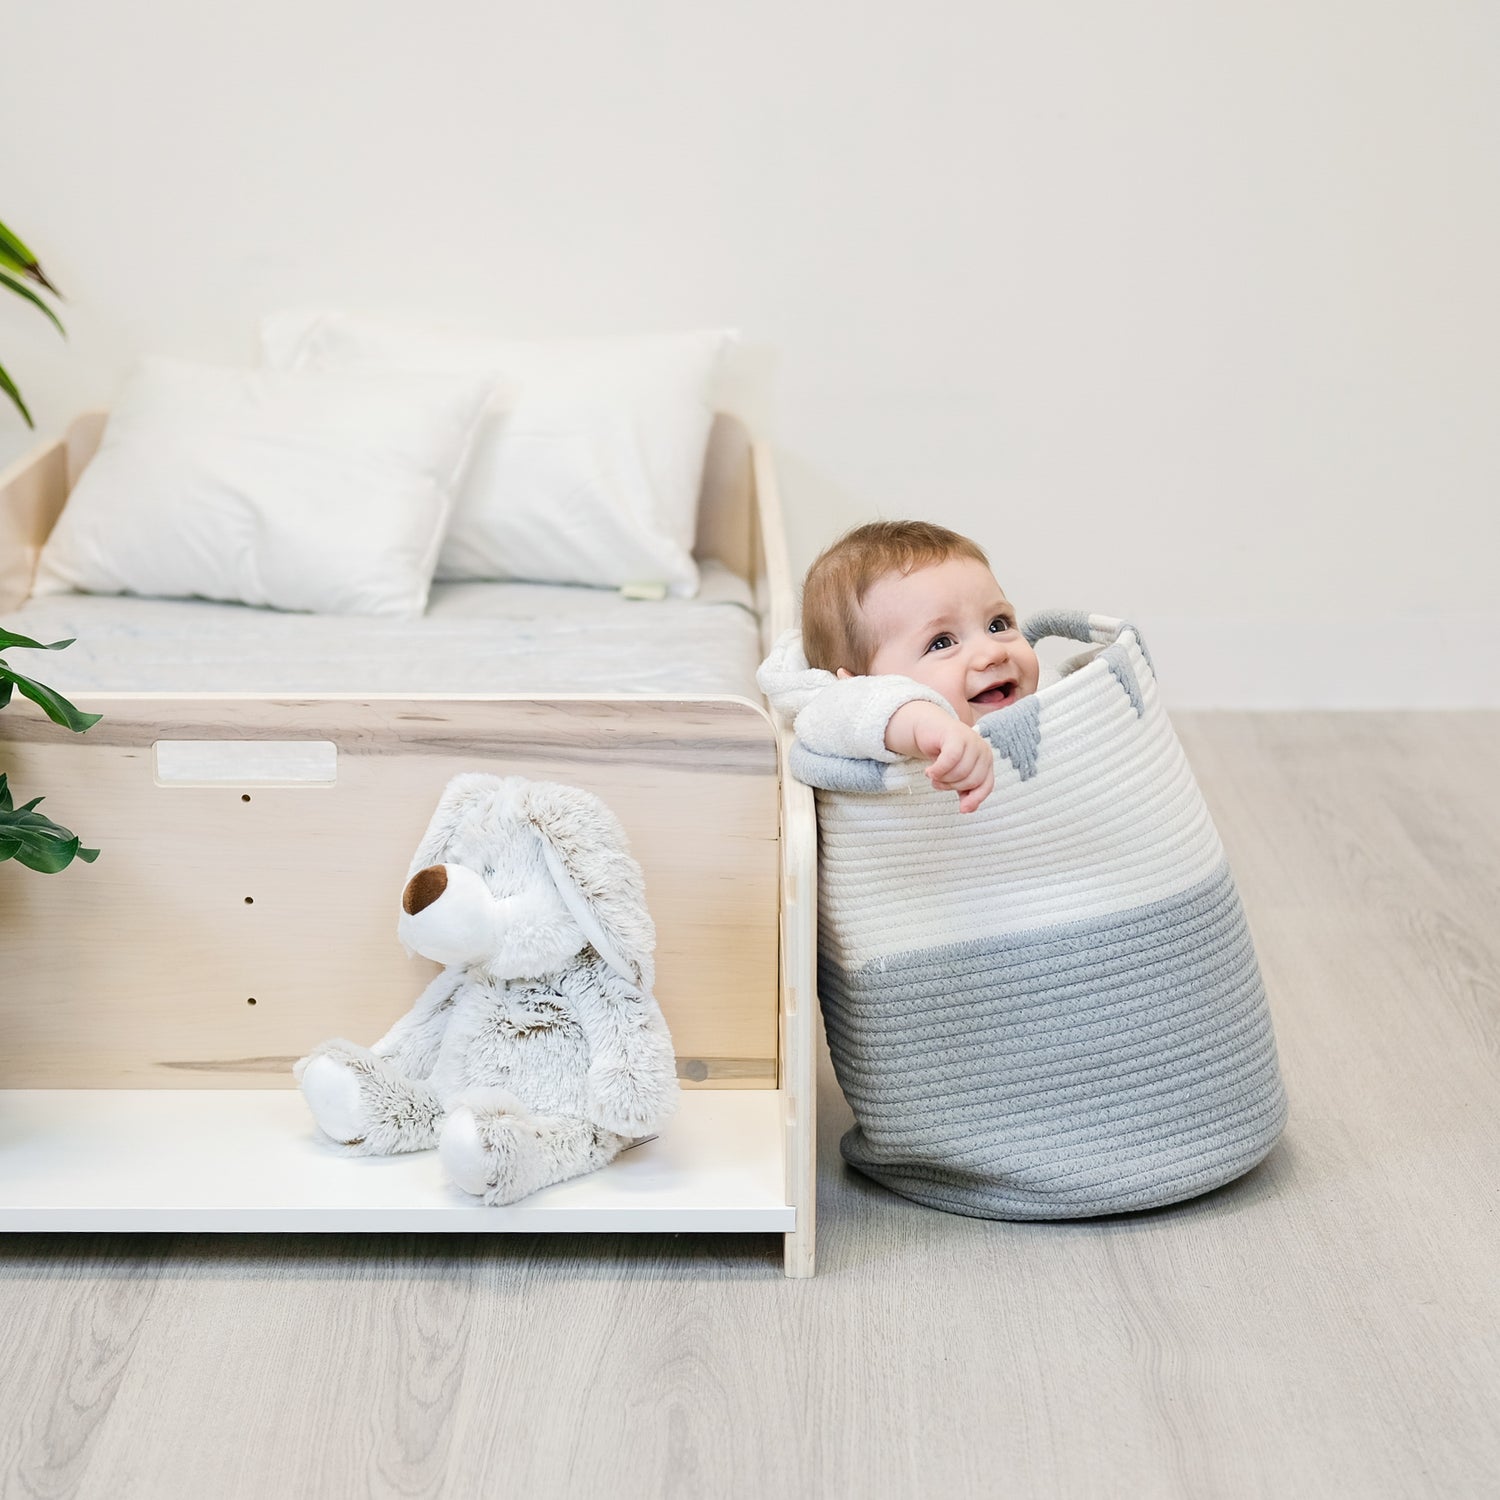 The Best Montessori Bed and furniture for toddlers